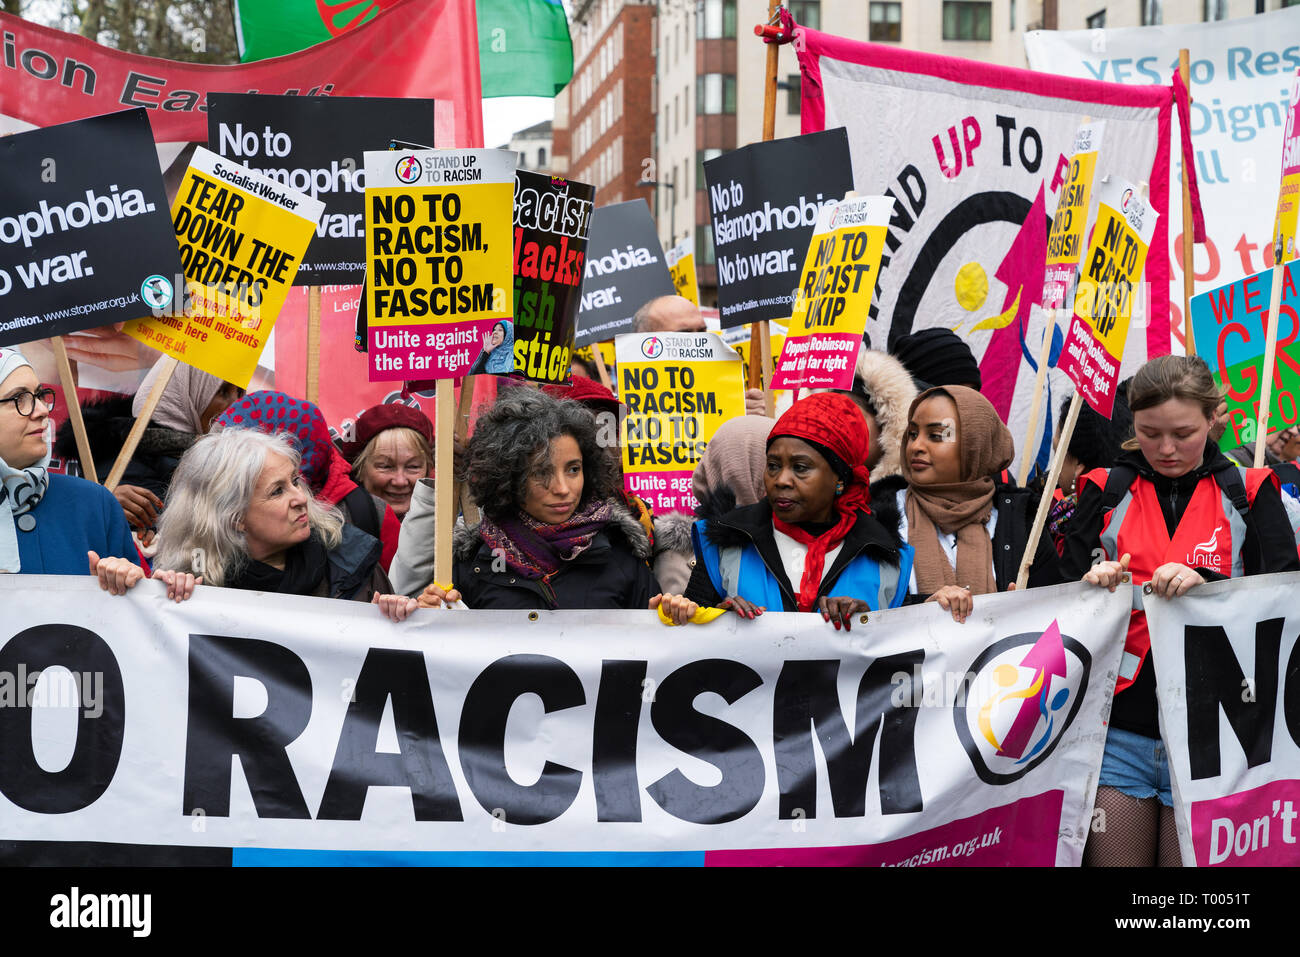 London, UK. 16th March, 2019. people gather to protest against far-right groups in UK and Europe. Credit: AndKa/Alamy Live News Stock Photo